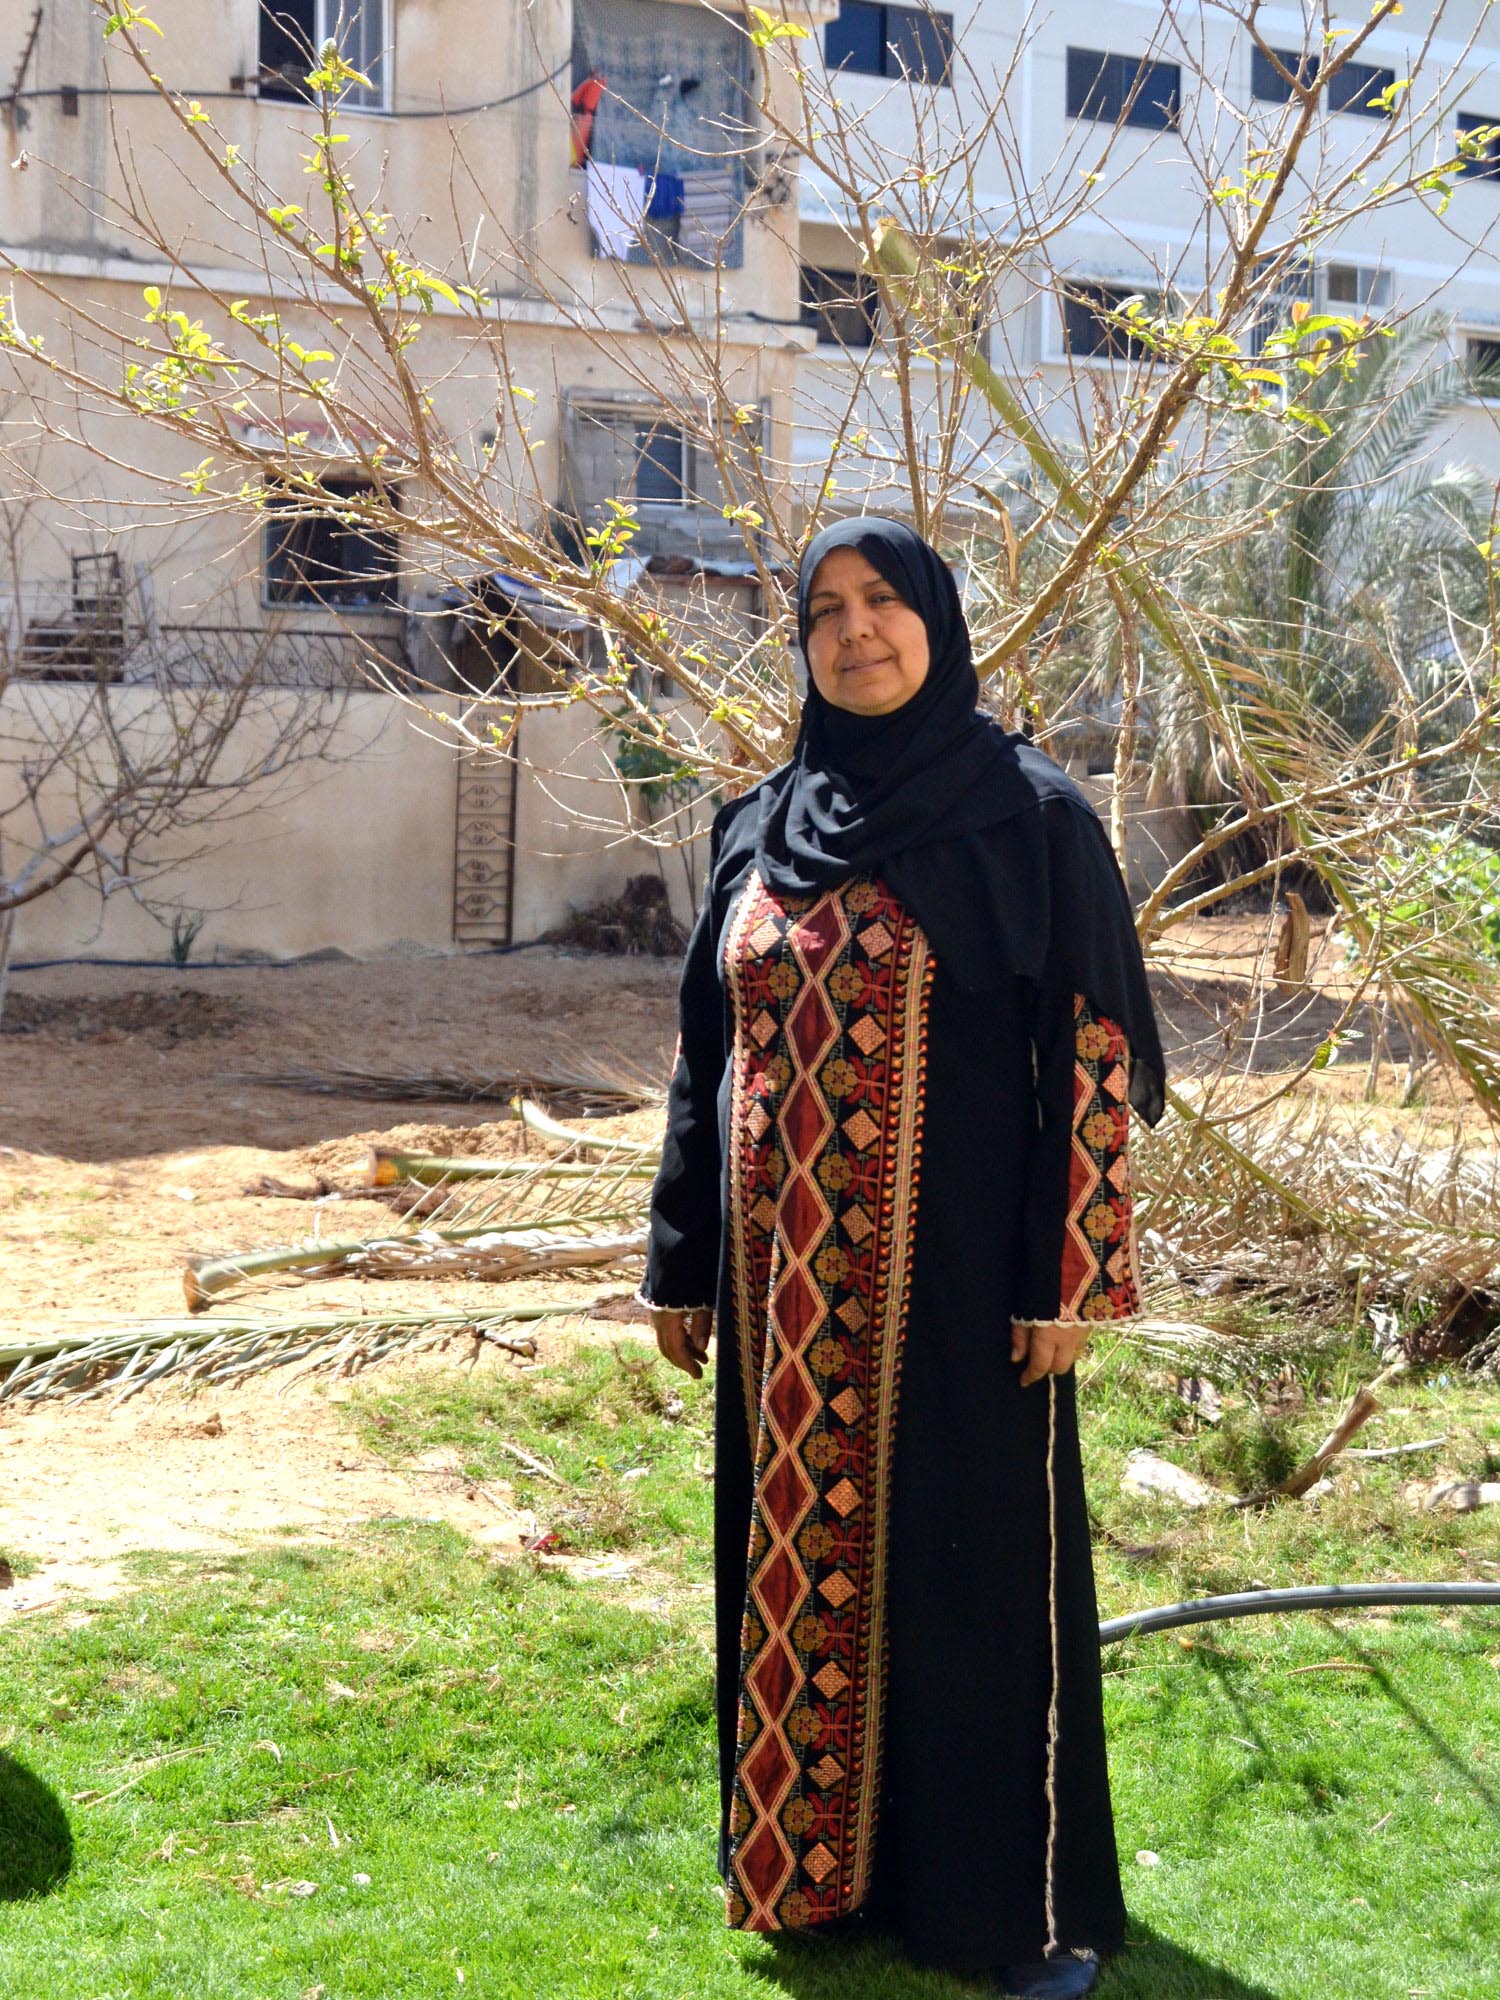 Om Ahmed heads a group of 25 Gaza women campaigning for pressing neighborhood issues like water and hygiene.